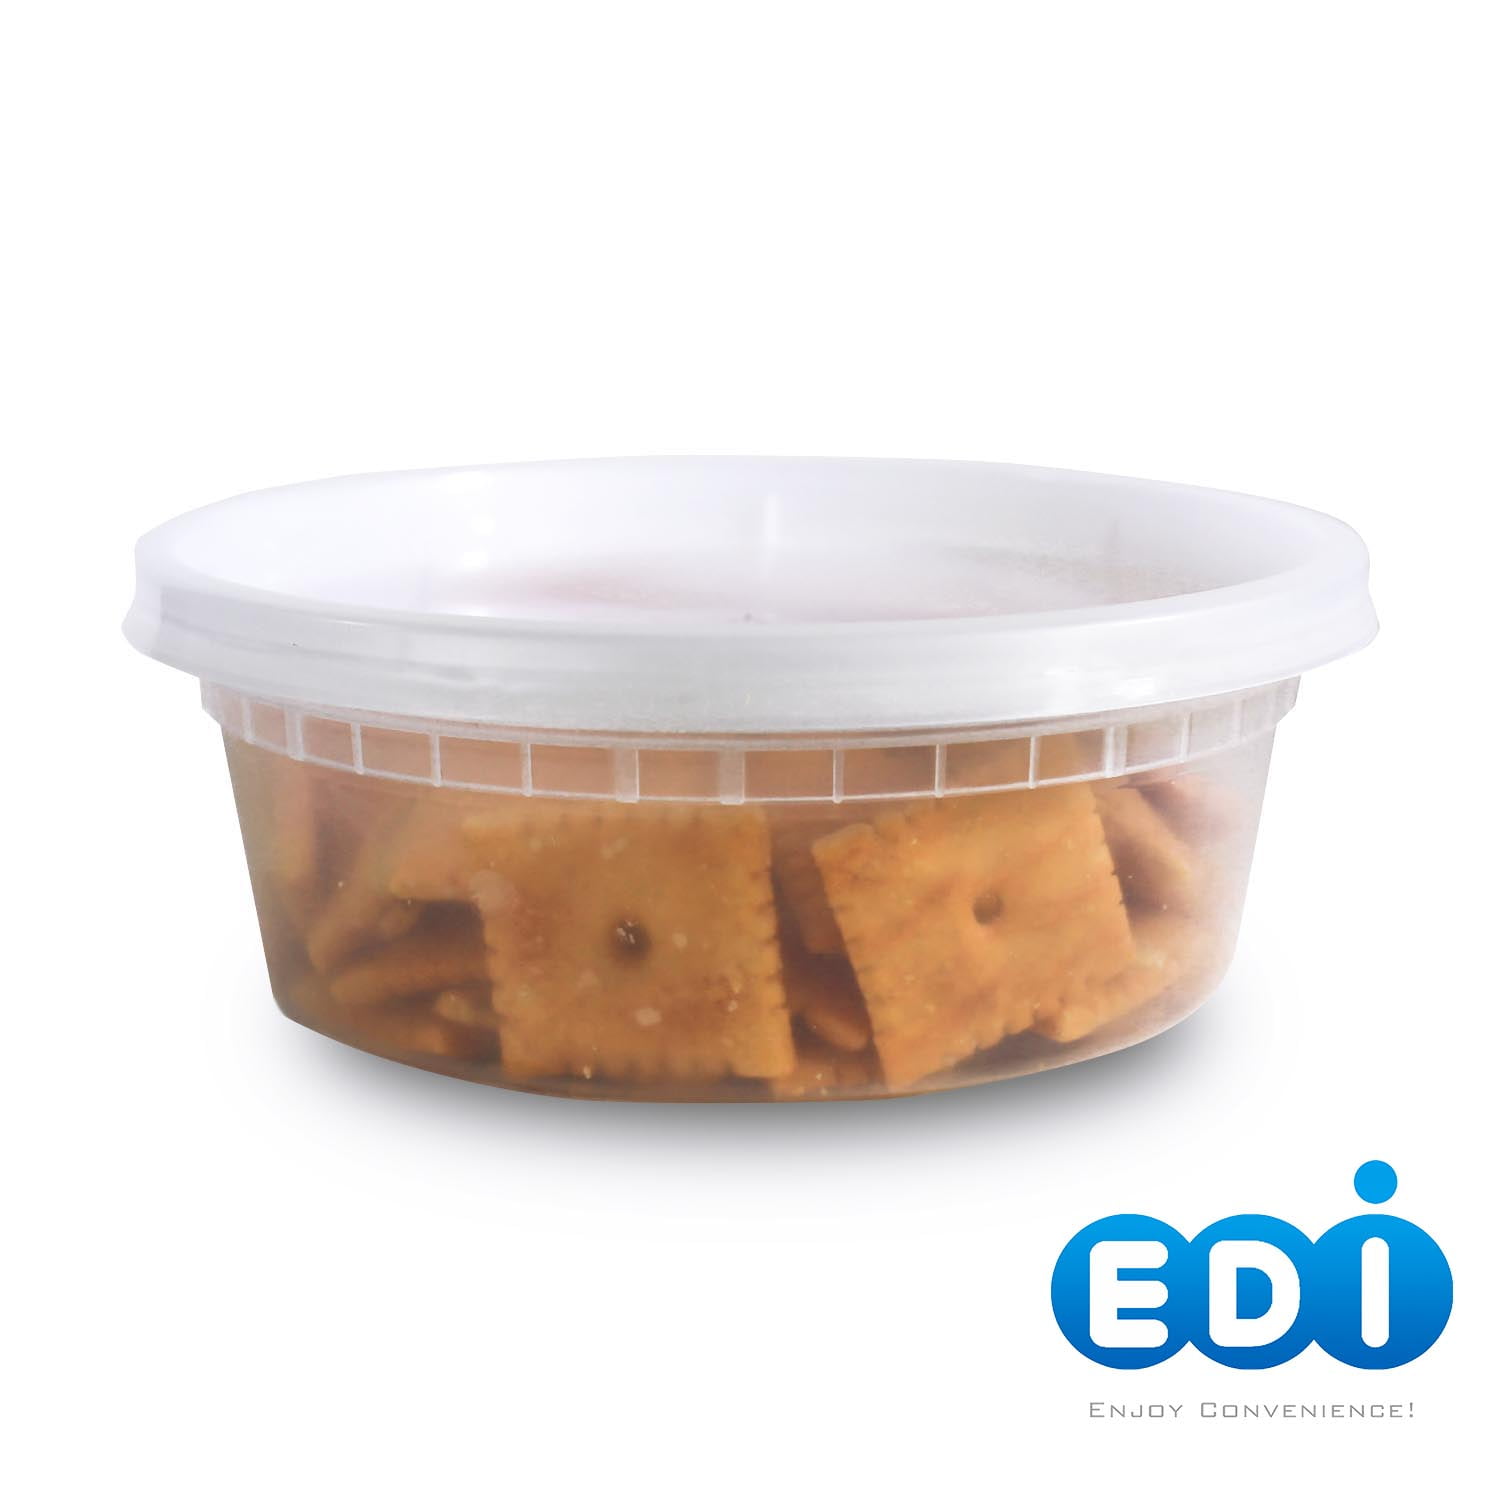 8oz DELI CONTAINER WITH LID - 5 x 1 1/2 TALL - 250/CASE